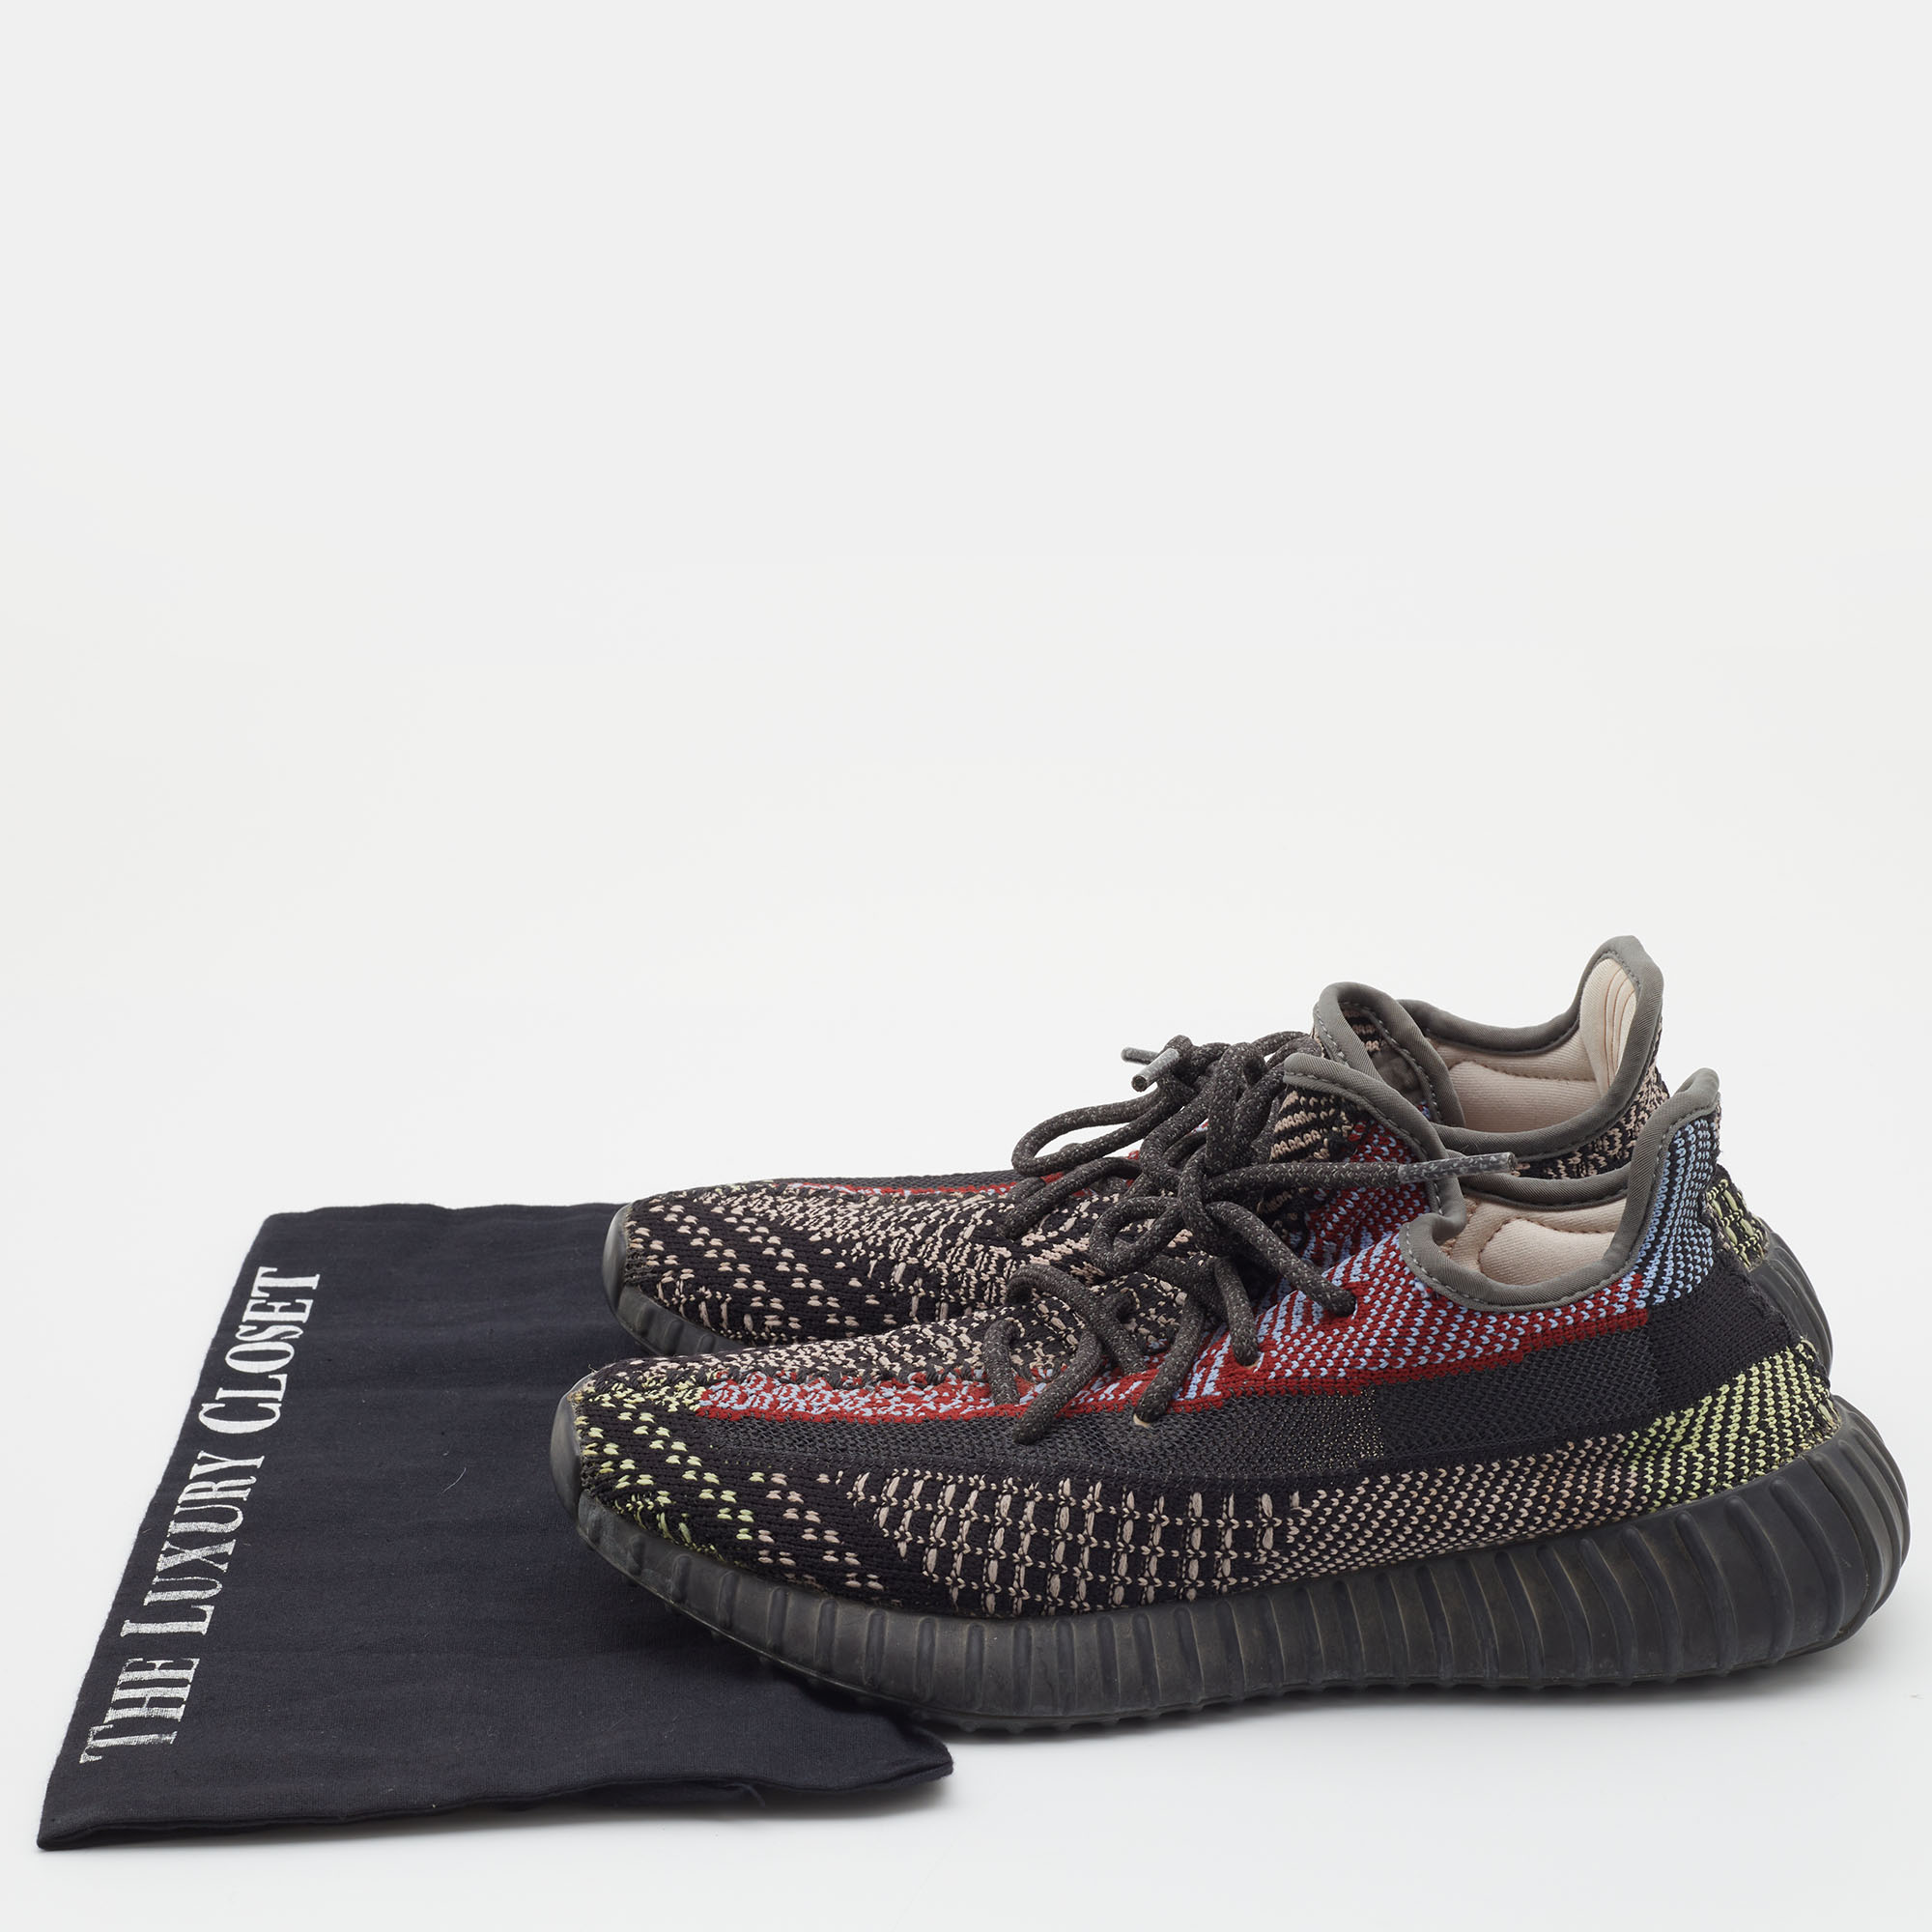 Adidas Yeezy Boost Black Knit Fabric 350 V2 Yecheil (Non-Reflective) Sneakers Size 38 2/3